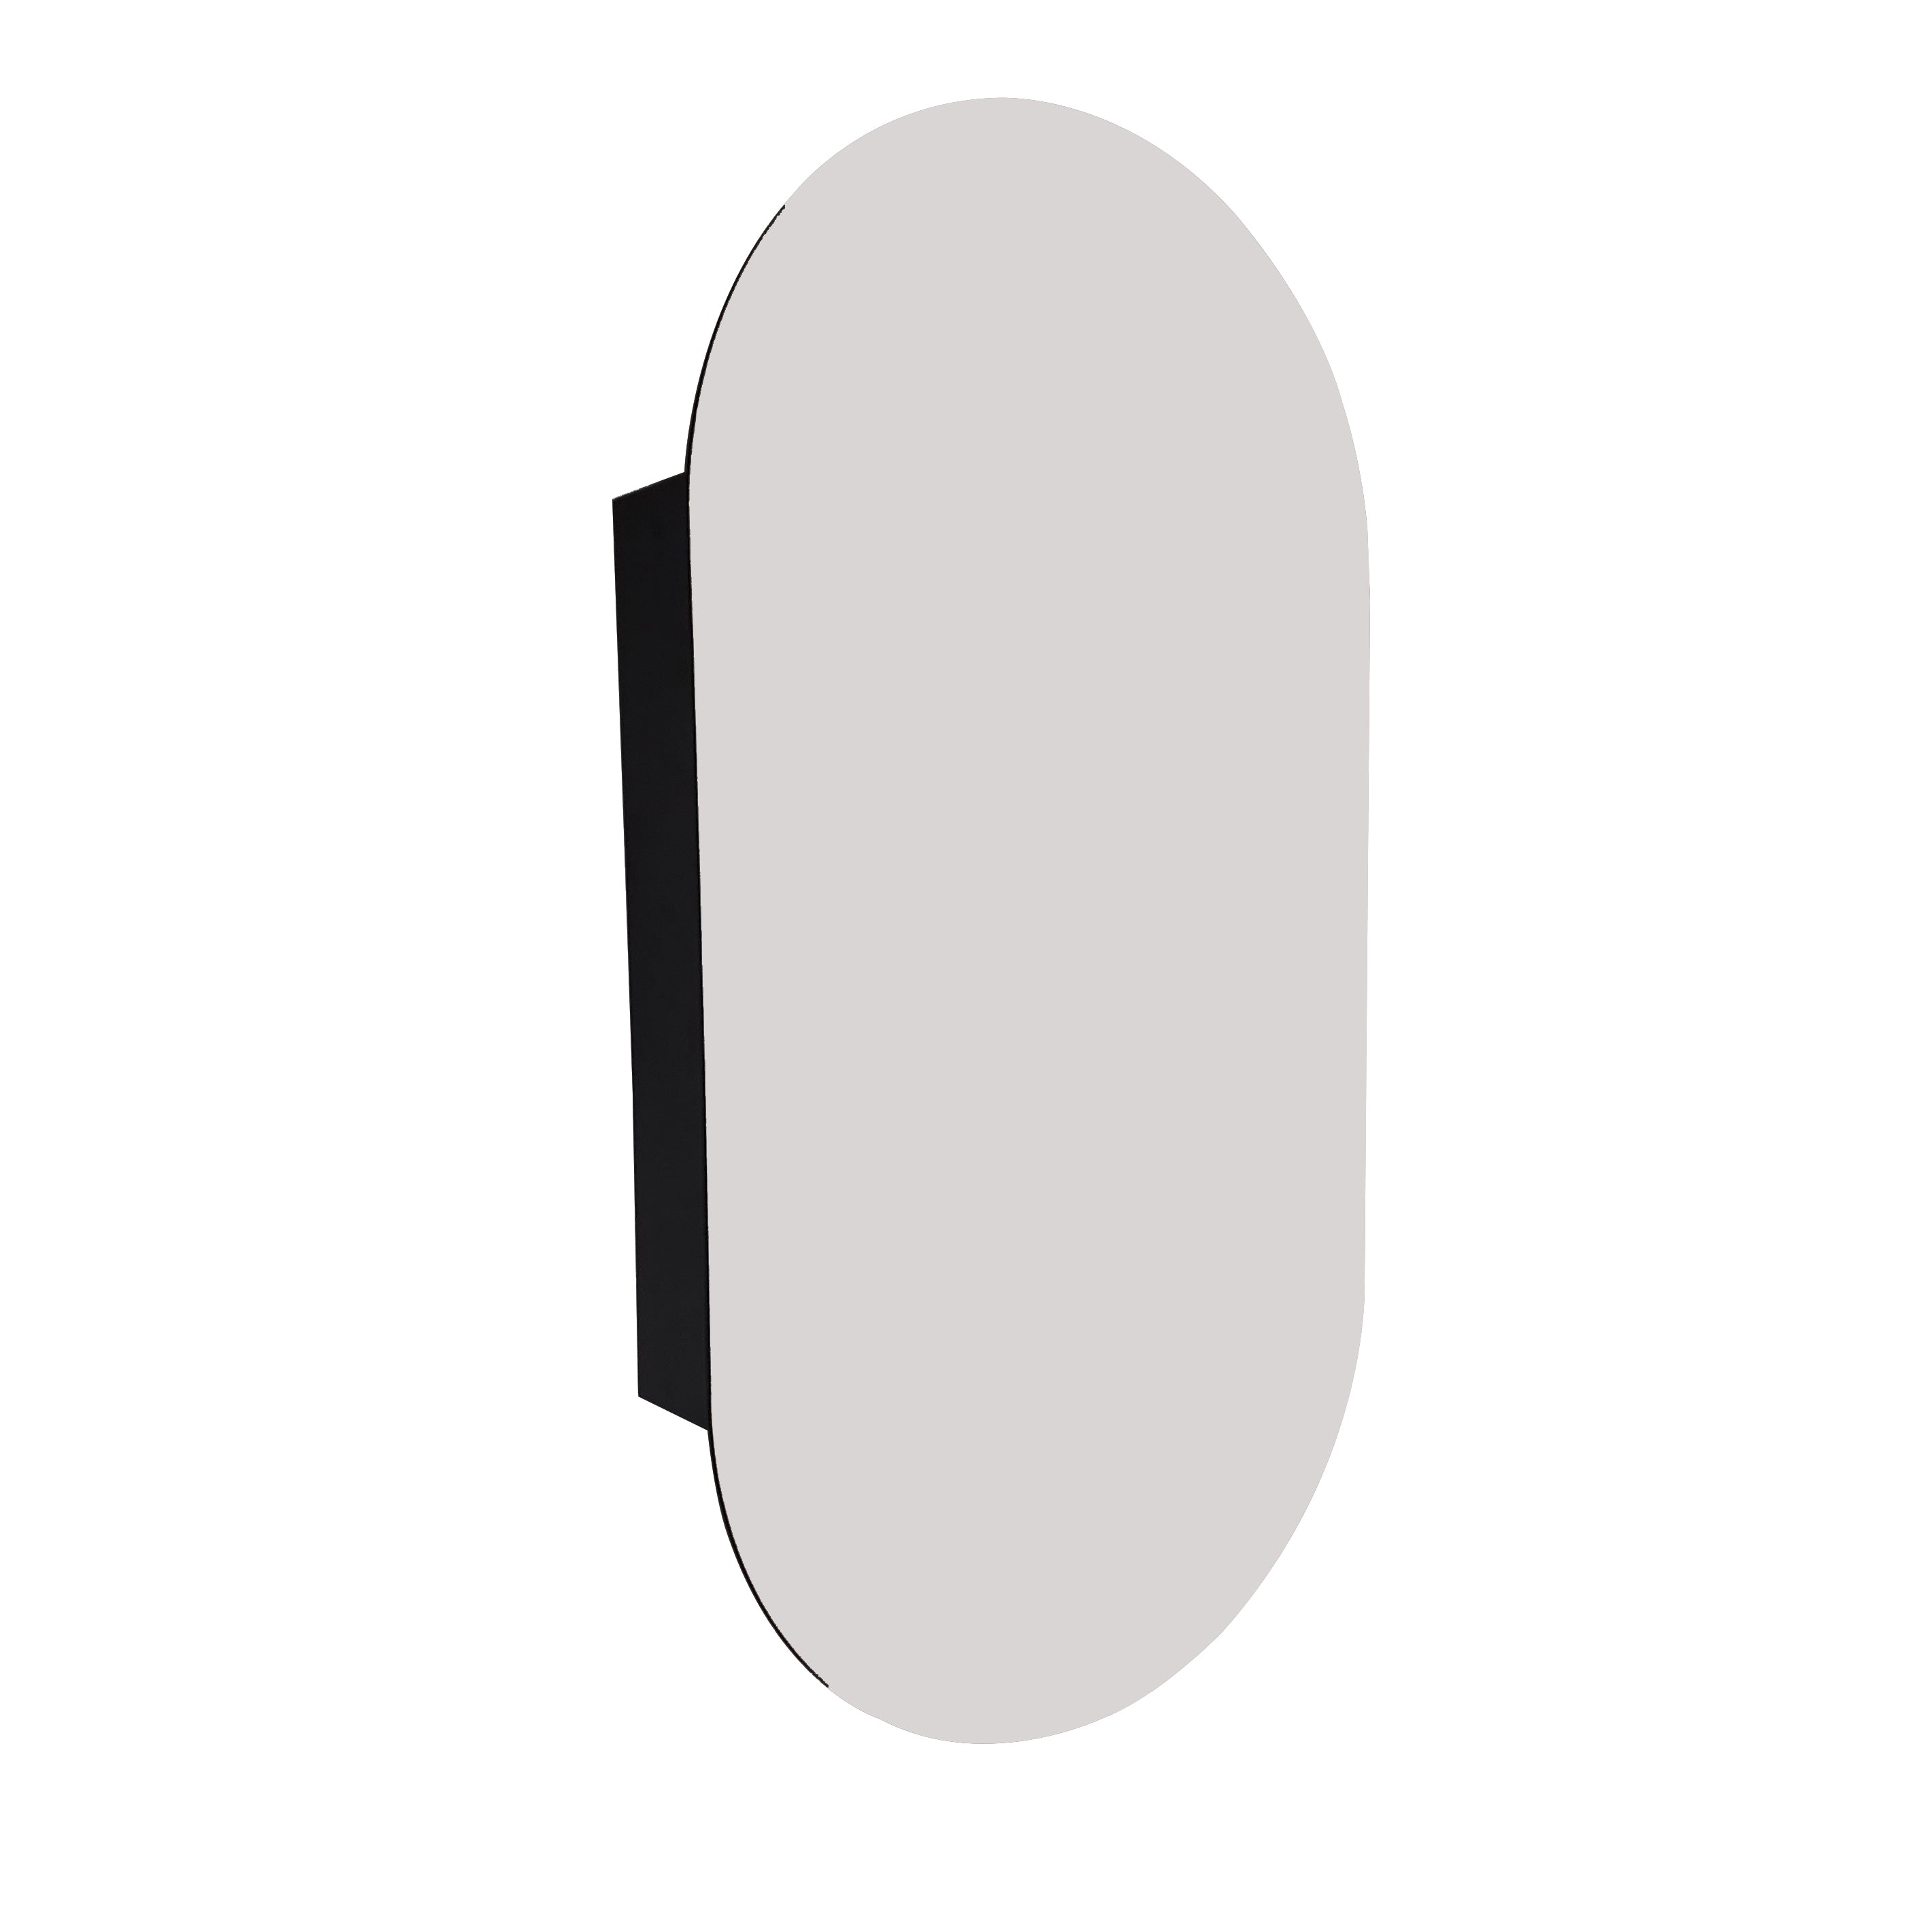 NEO OVAL INSET MIRROR CABINET 500 X 950MM - 2 COLOURS